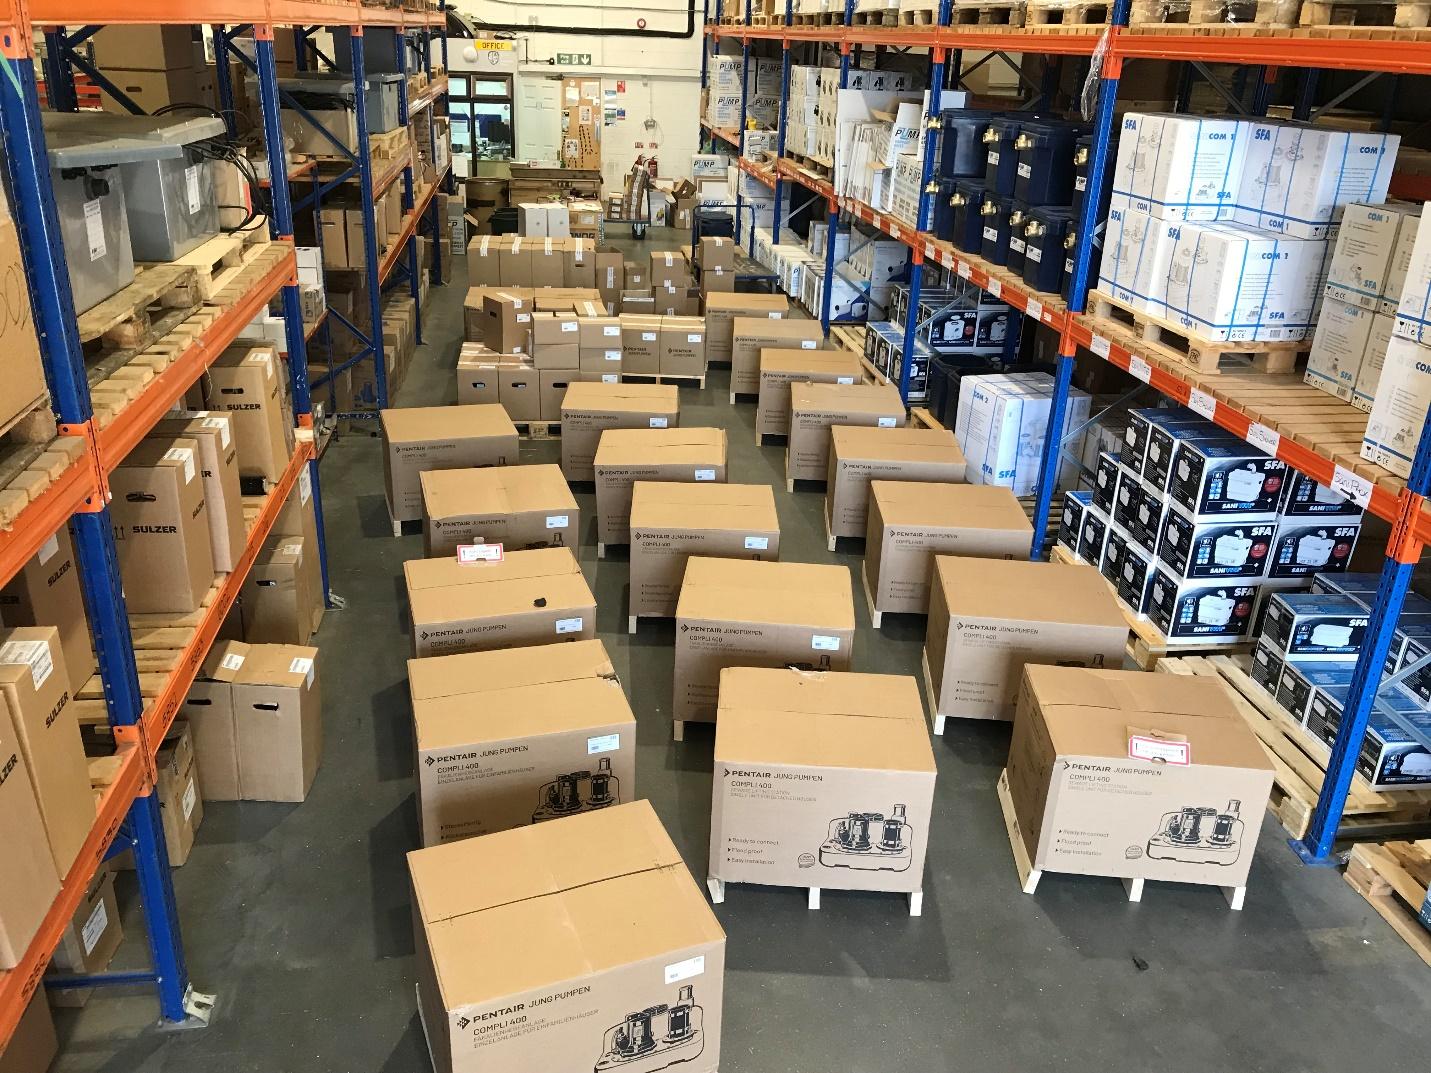 A warehouse full of boxes

Description automatically generated with medium confidence